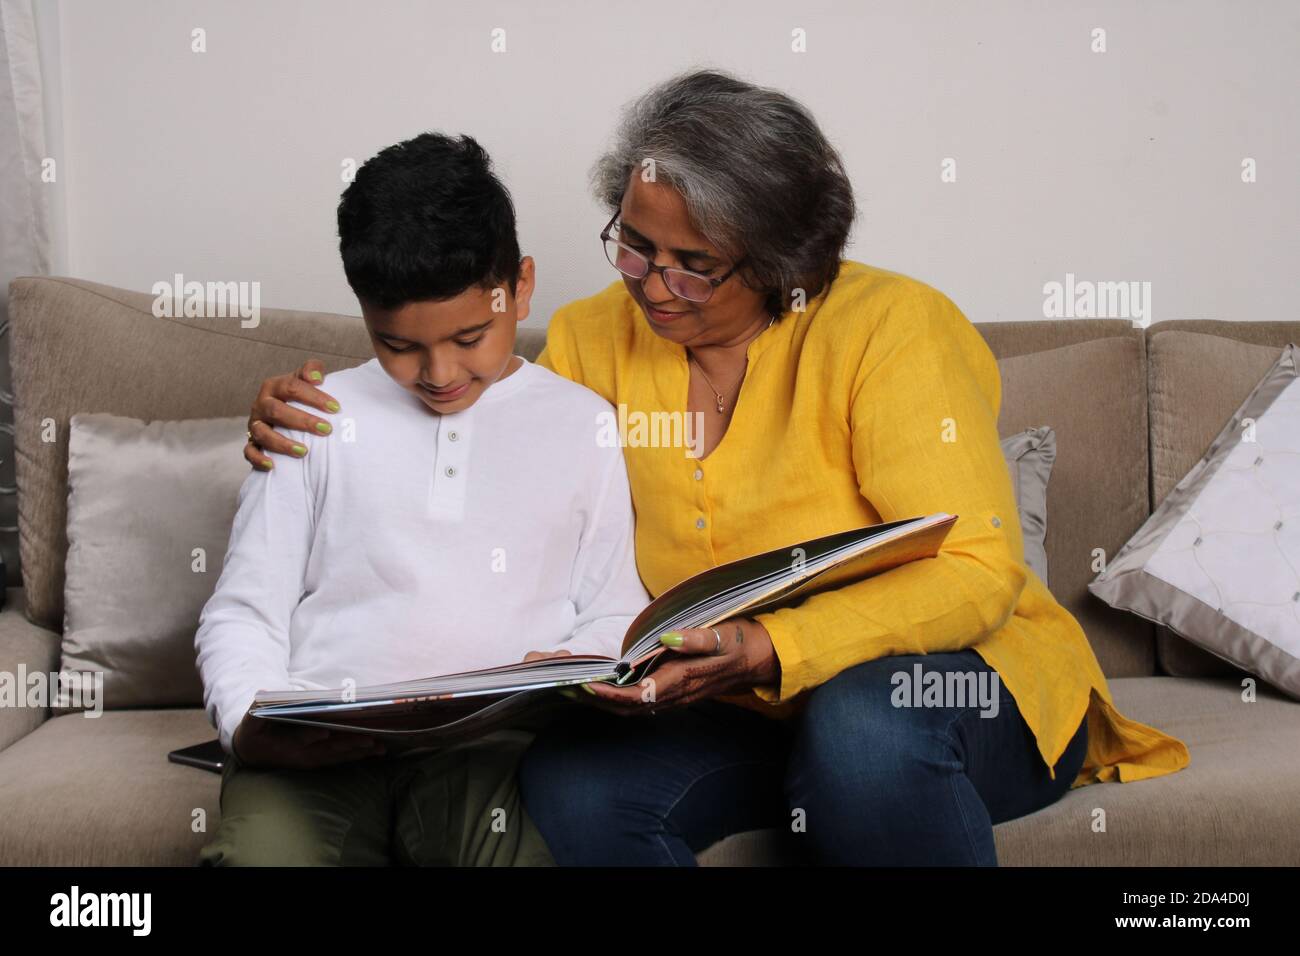 Happy moments with grandma, indian/asian senior lady spending quality time with her grand son reading book together. Stock Photo